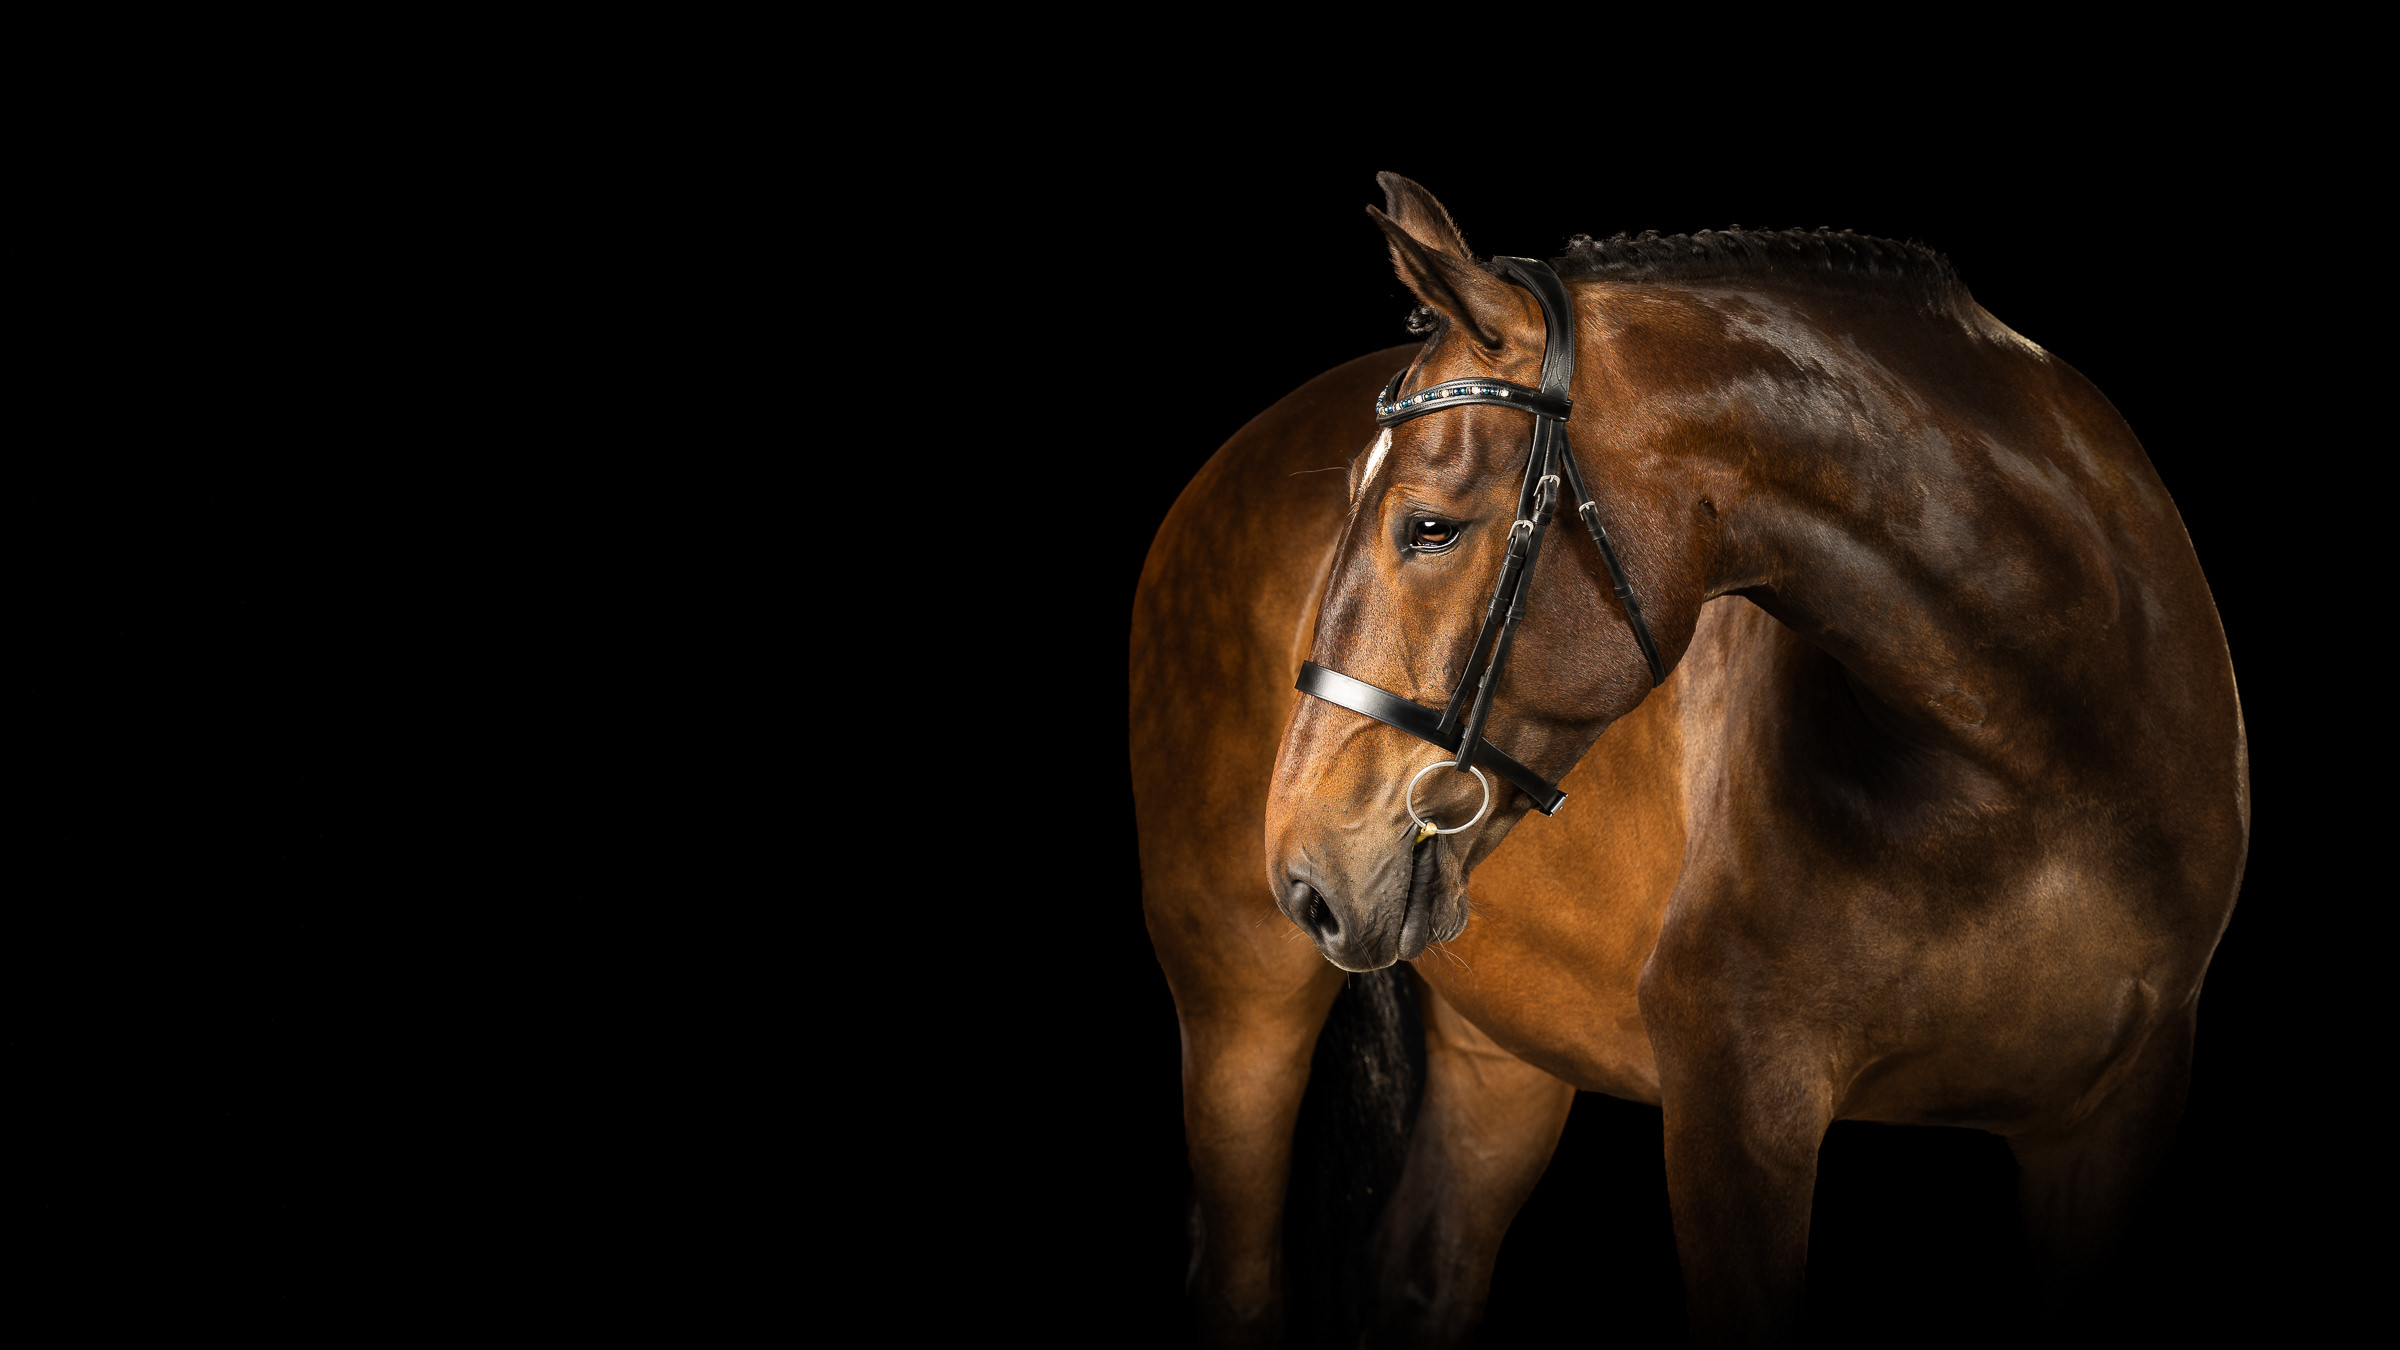 Studio portrait photo of a horse with bridle and plated mane